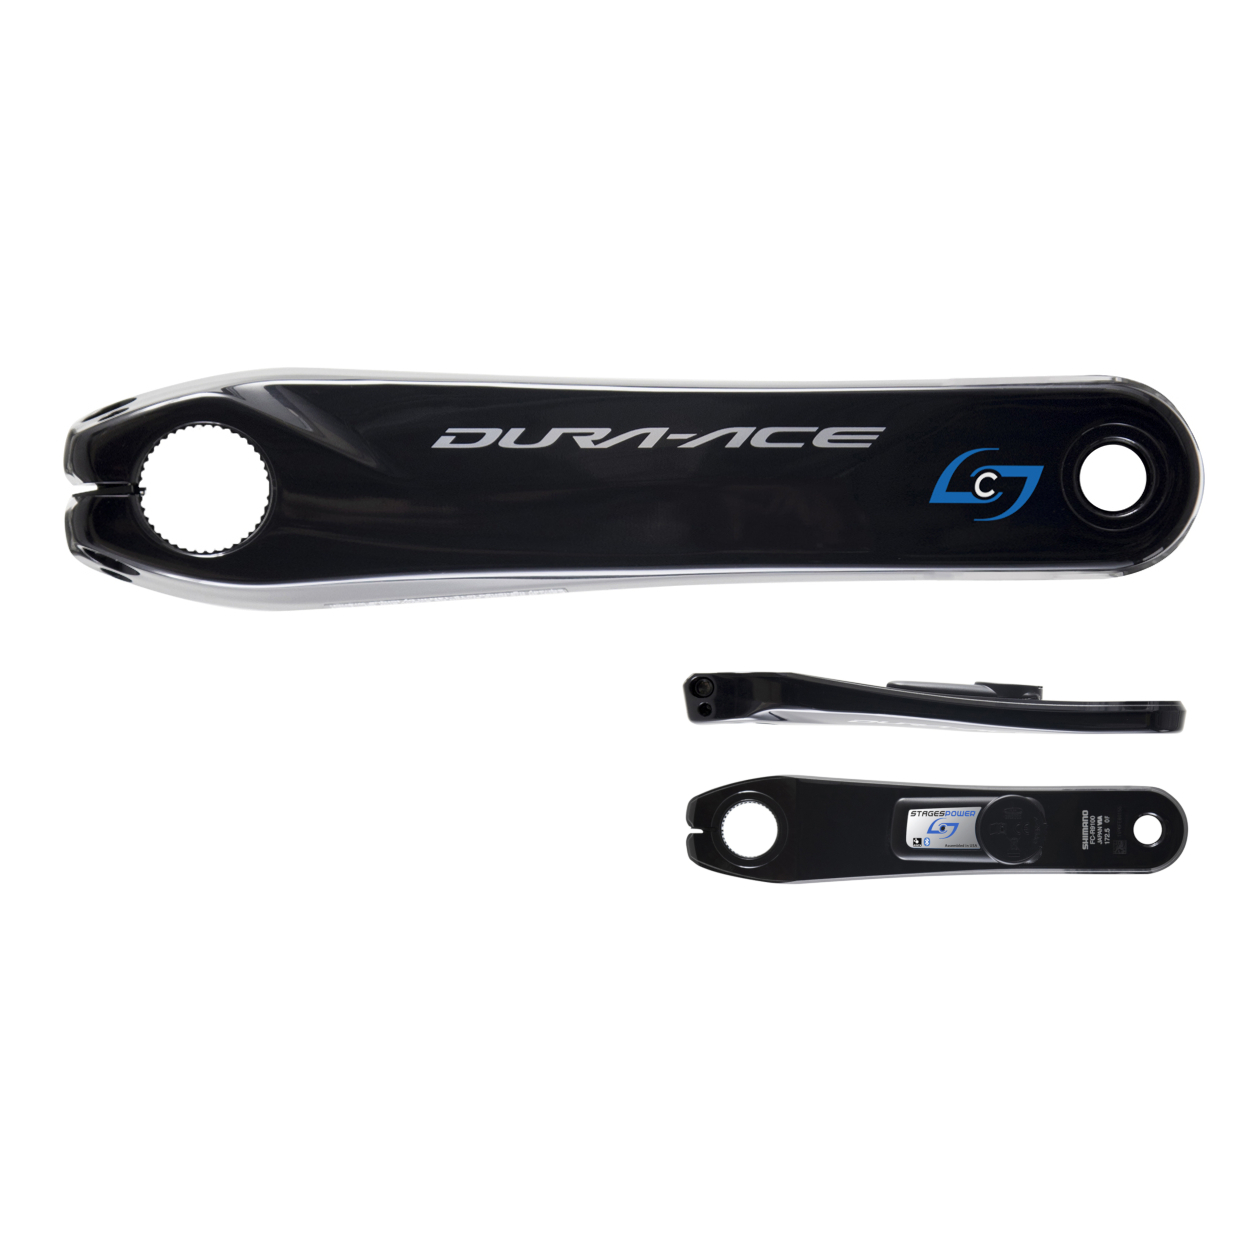 Productfoto van Stages Cycling Power L Powermeter | Crank Arm by Shimano - Dura Ace R9100